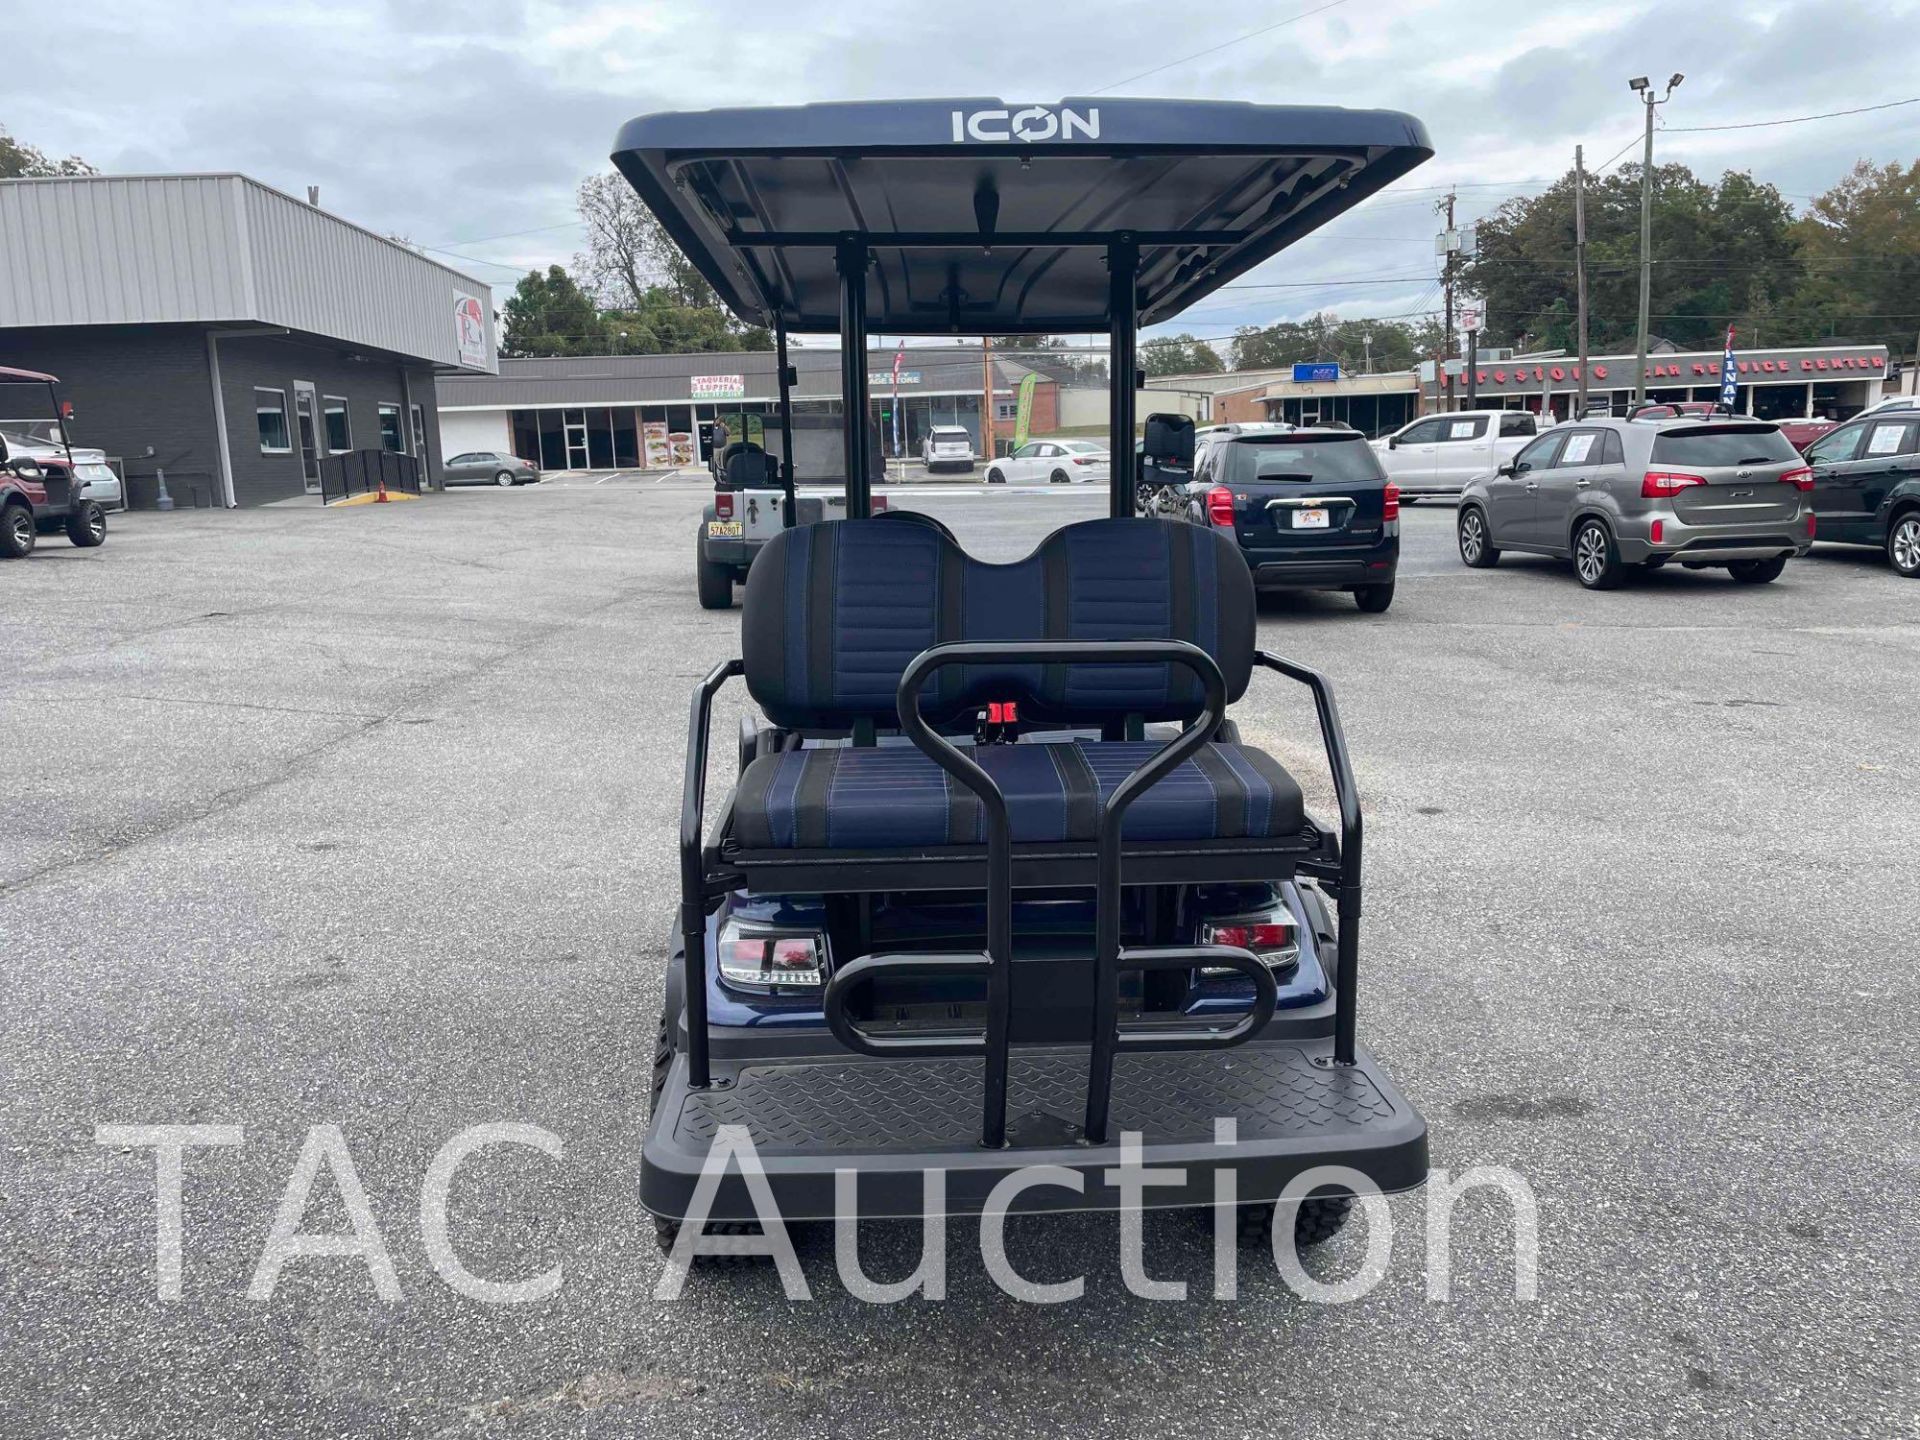 New 2023 ICON i40L Electric Golf Cart W/ Charger - Image 4 of 26